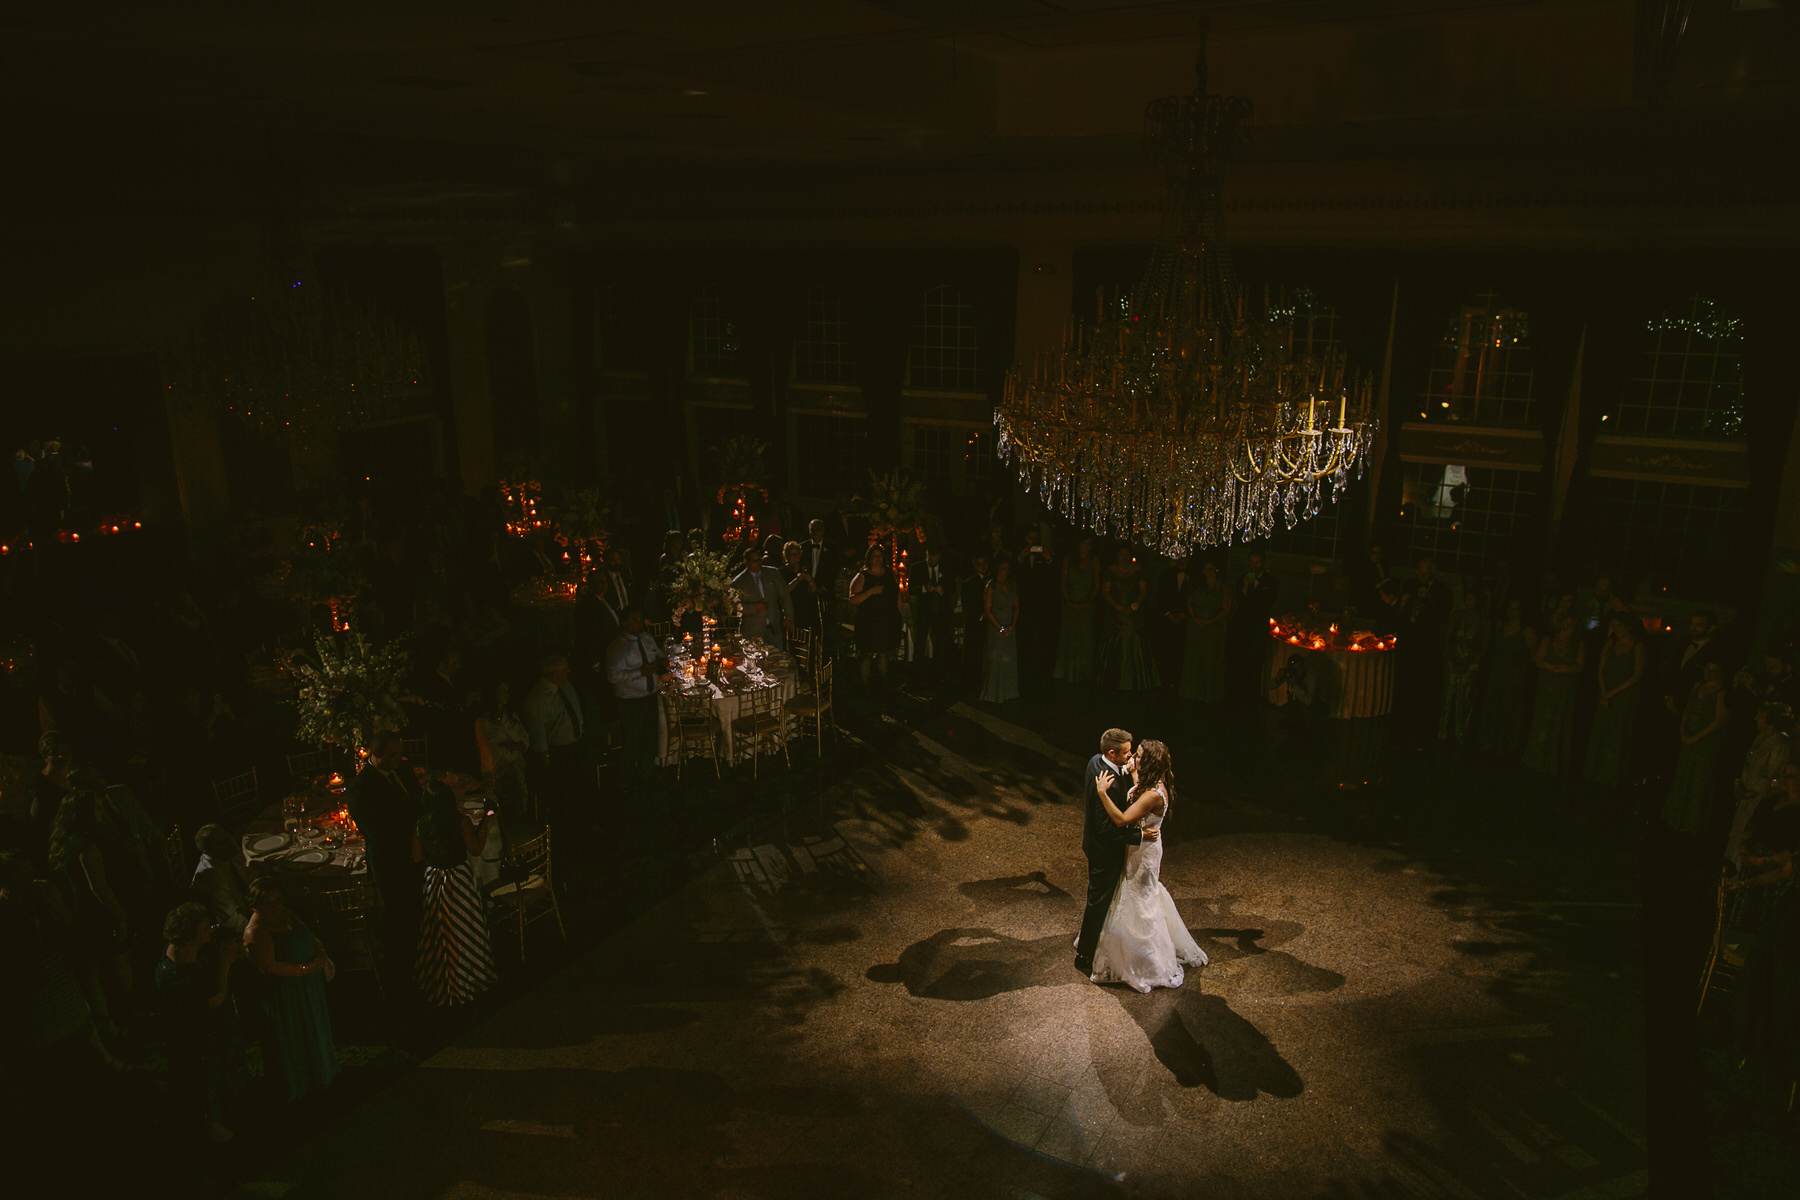 a bride and groom sharing their first dance.